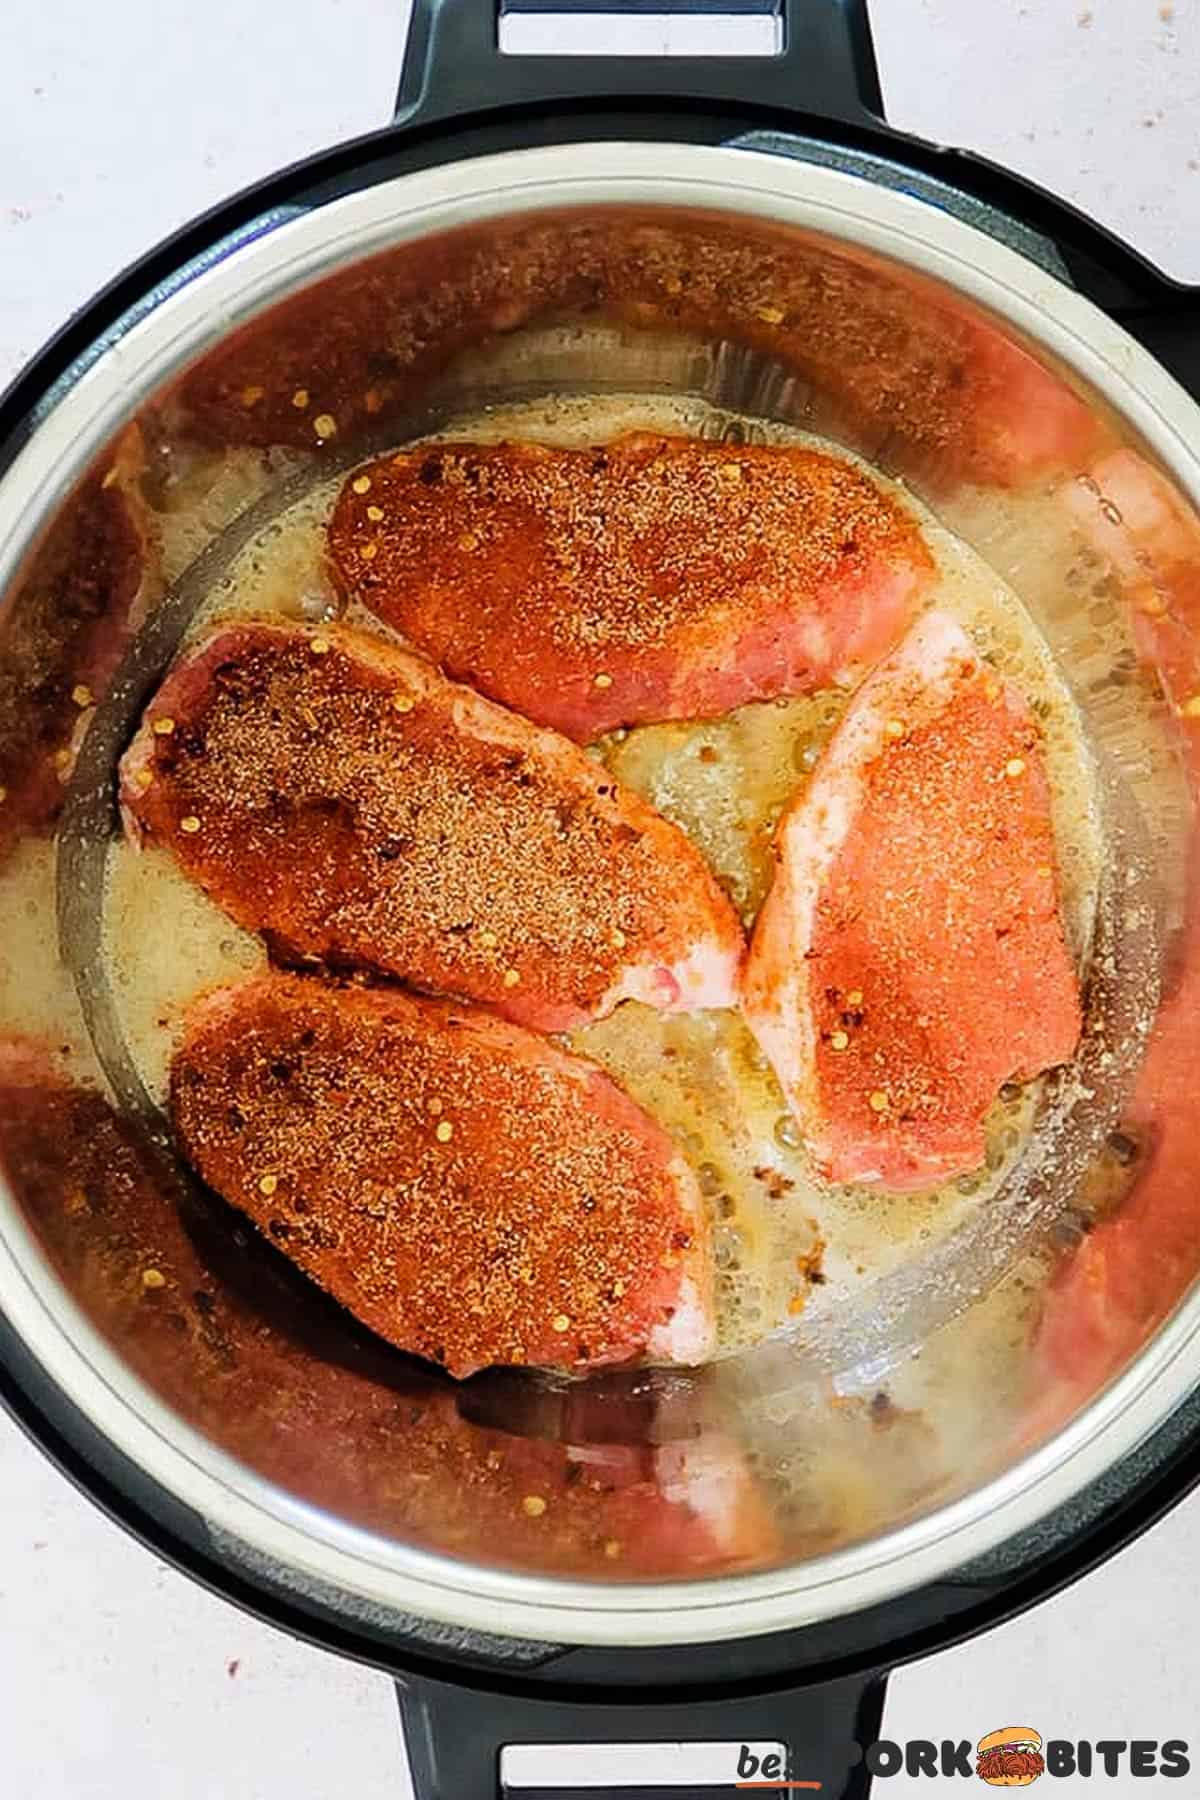 raw pork chops with seasoning in the pan of a pressure cooker filled with melted butter